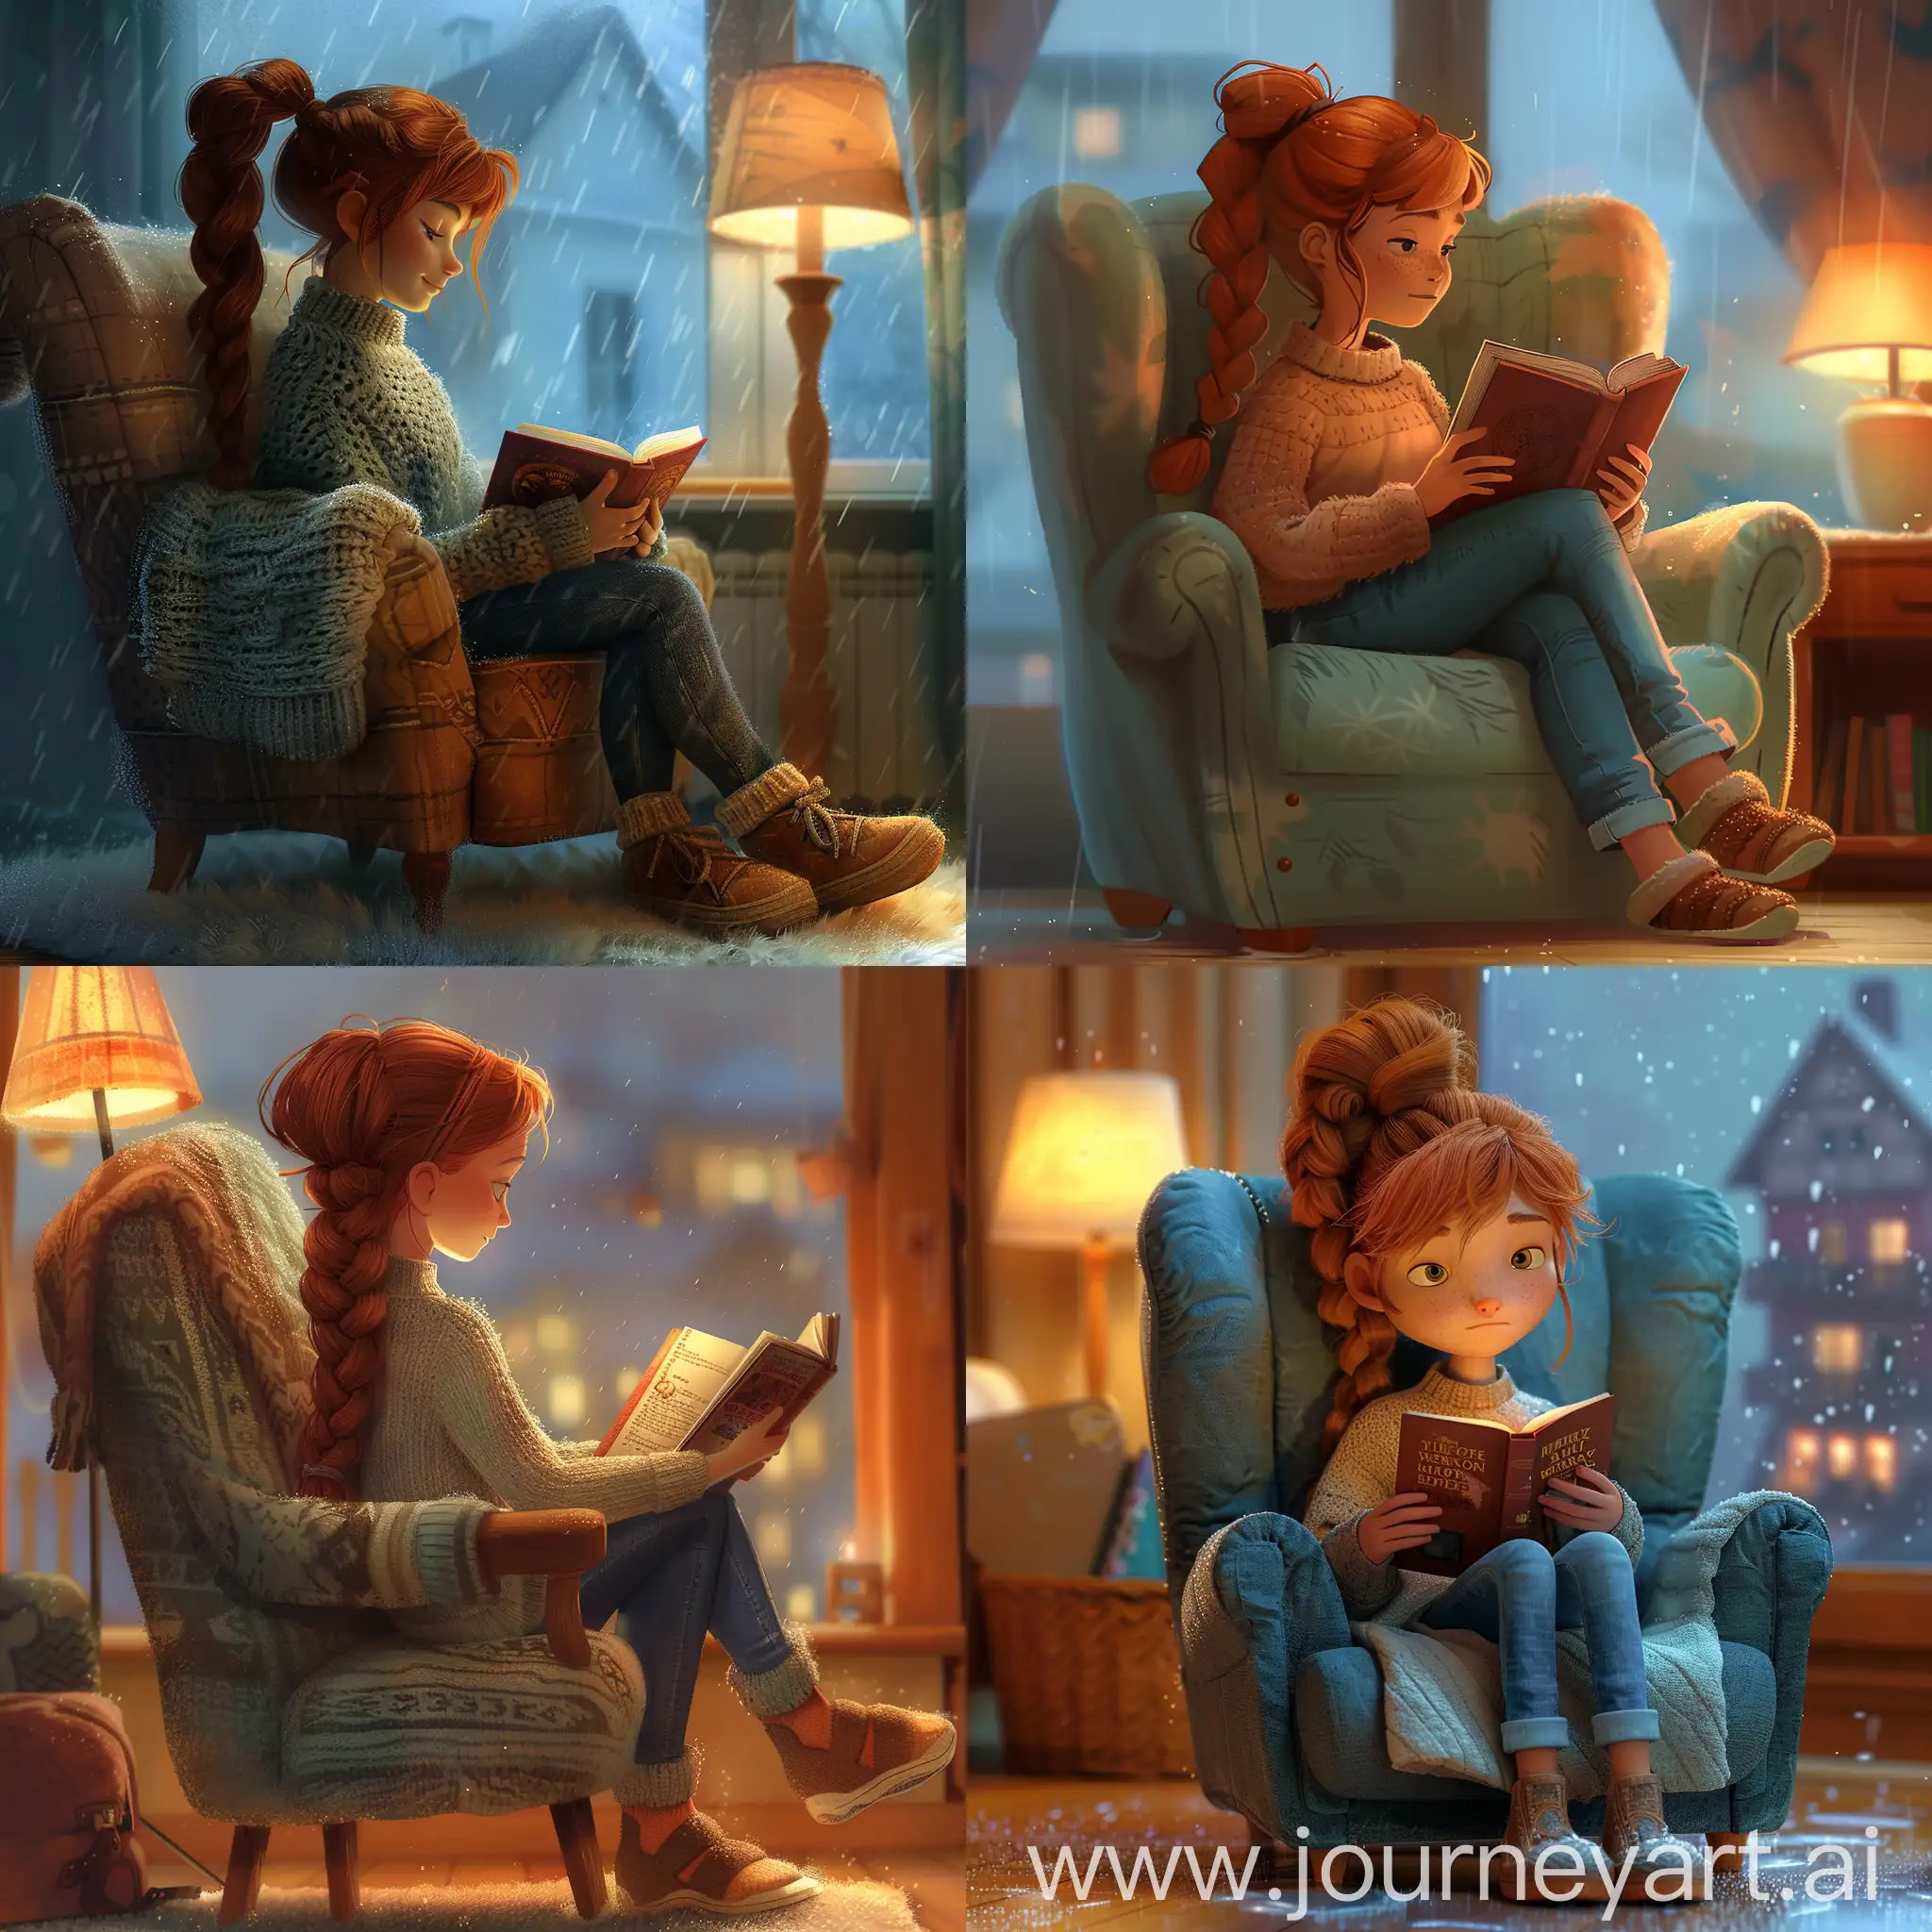 RedHaired-Teen-Immersed-in-Adventure-Book-in-Cozy-Rainy-Day-Setting